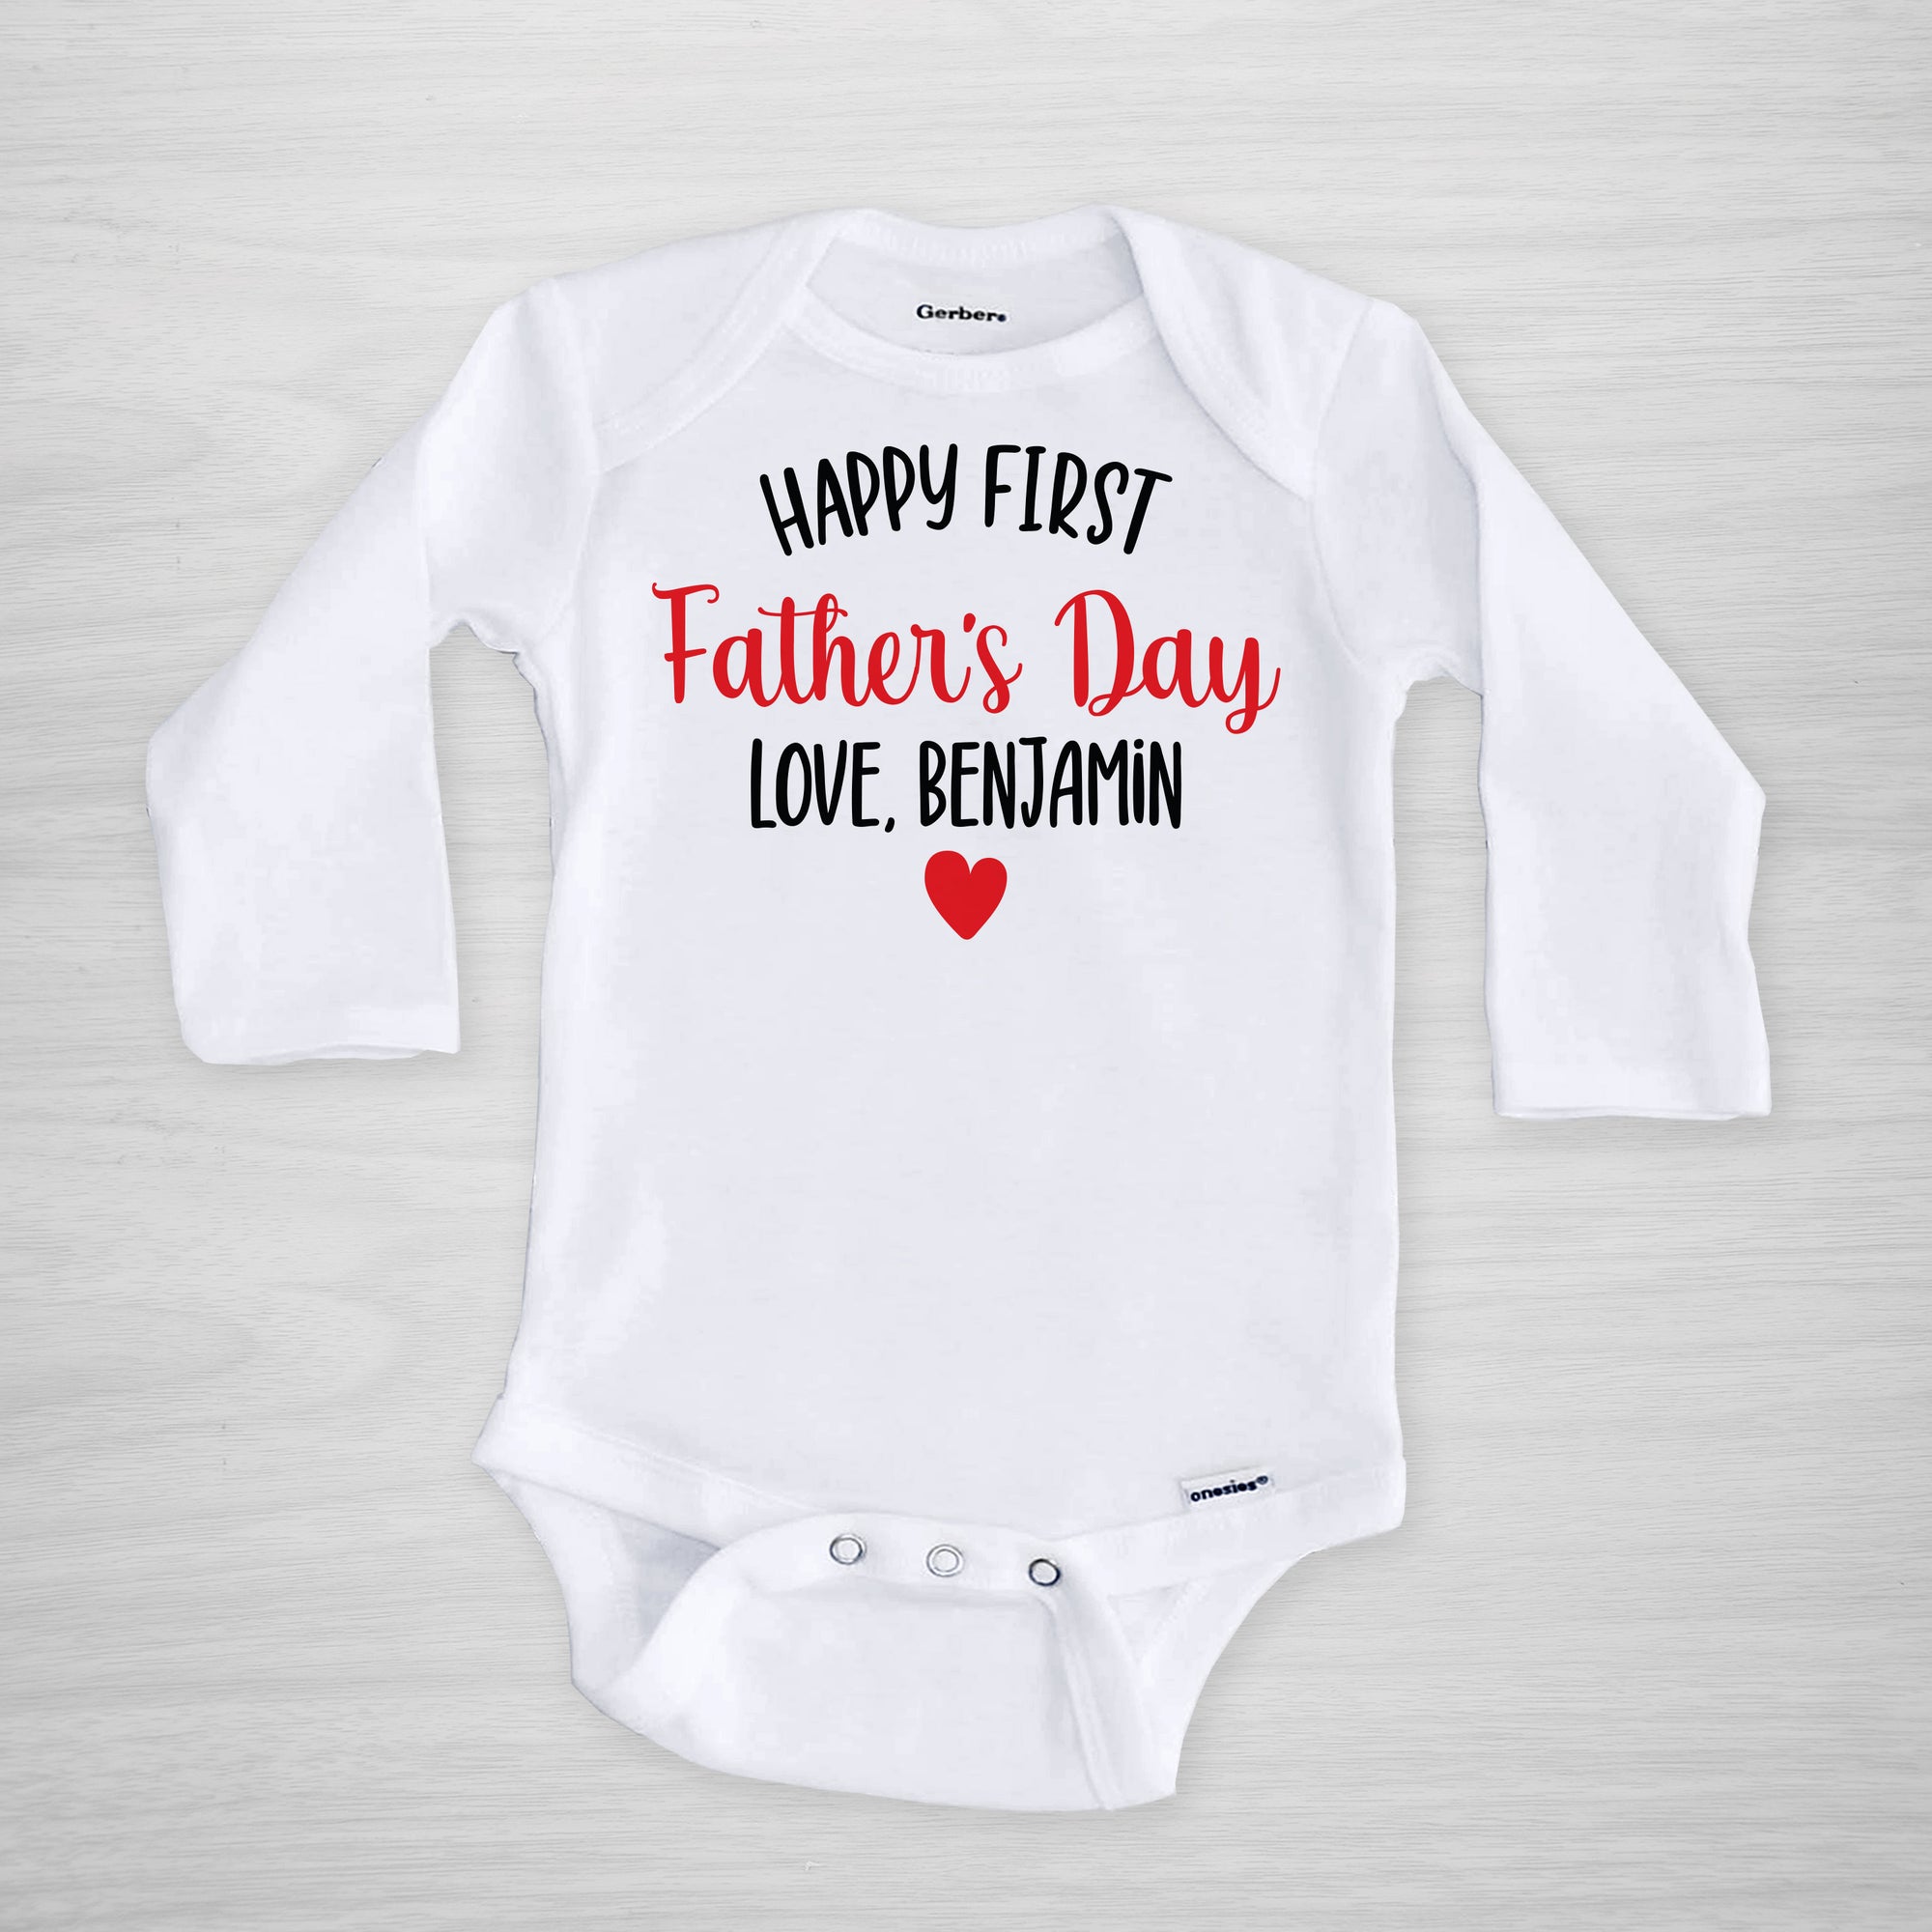 Happy first father's day onesie, personalized with the baby's name, short sleeved